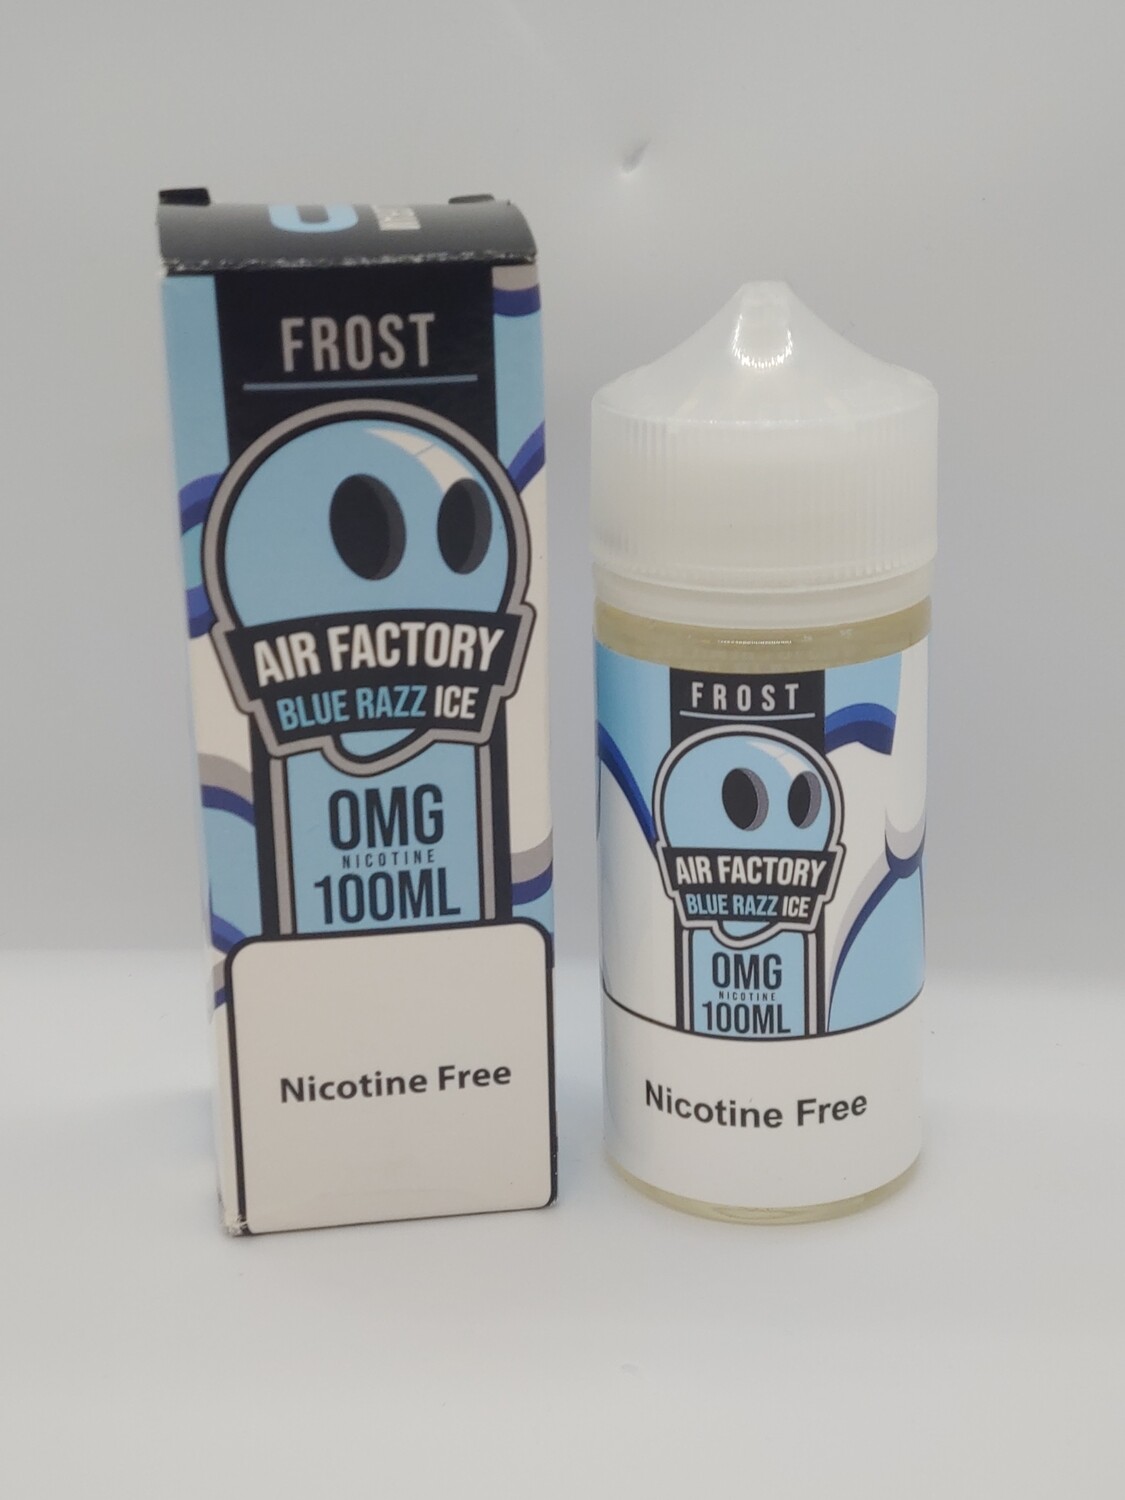 Air Factory Frost Blue Razz Ice 0mg 100ml